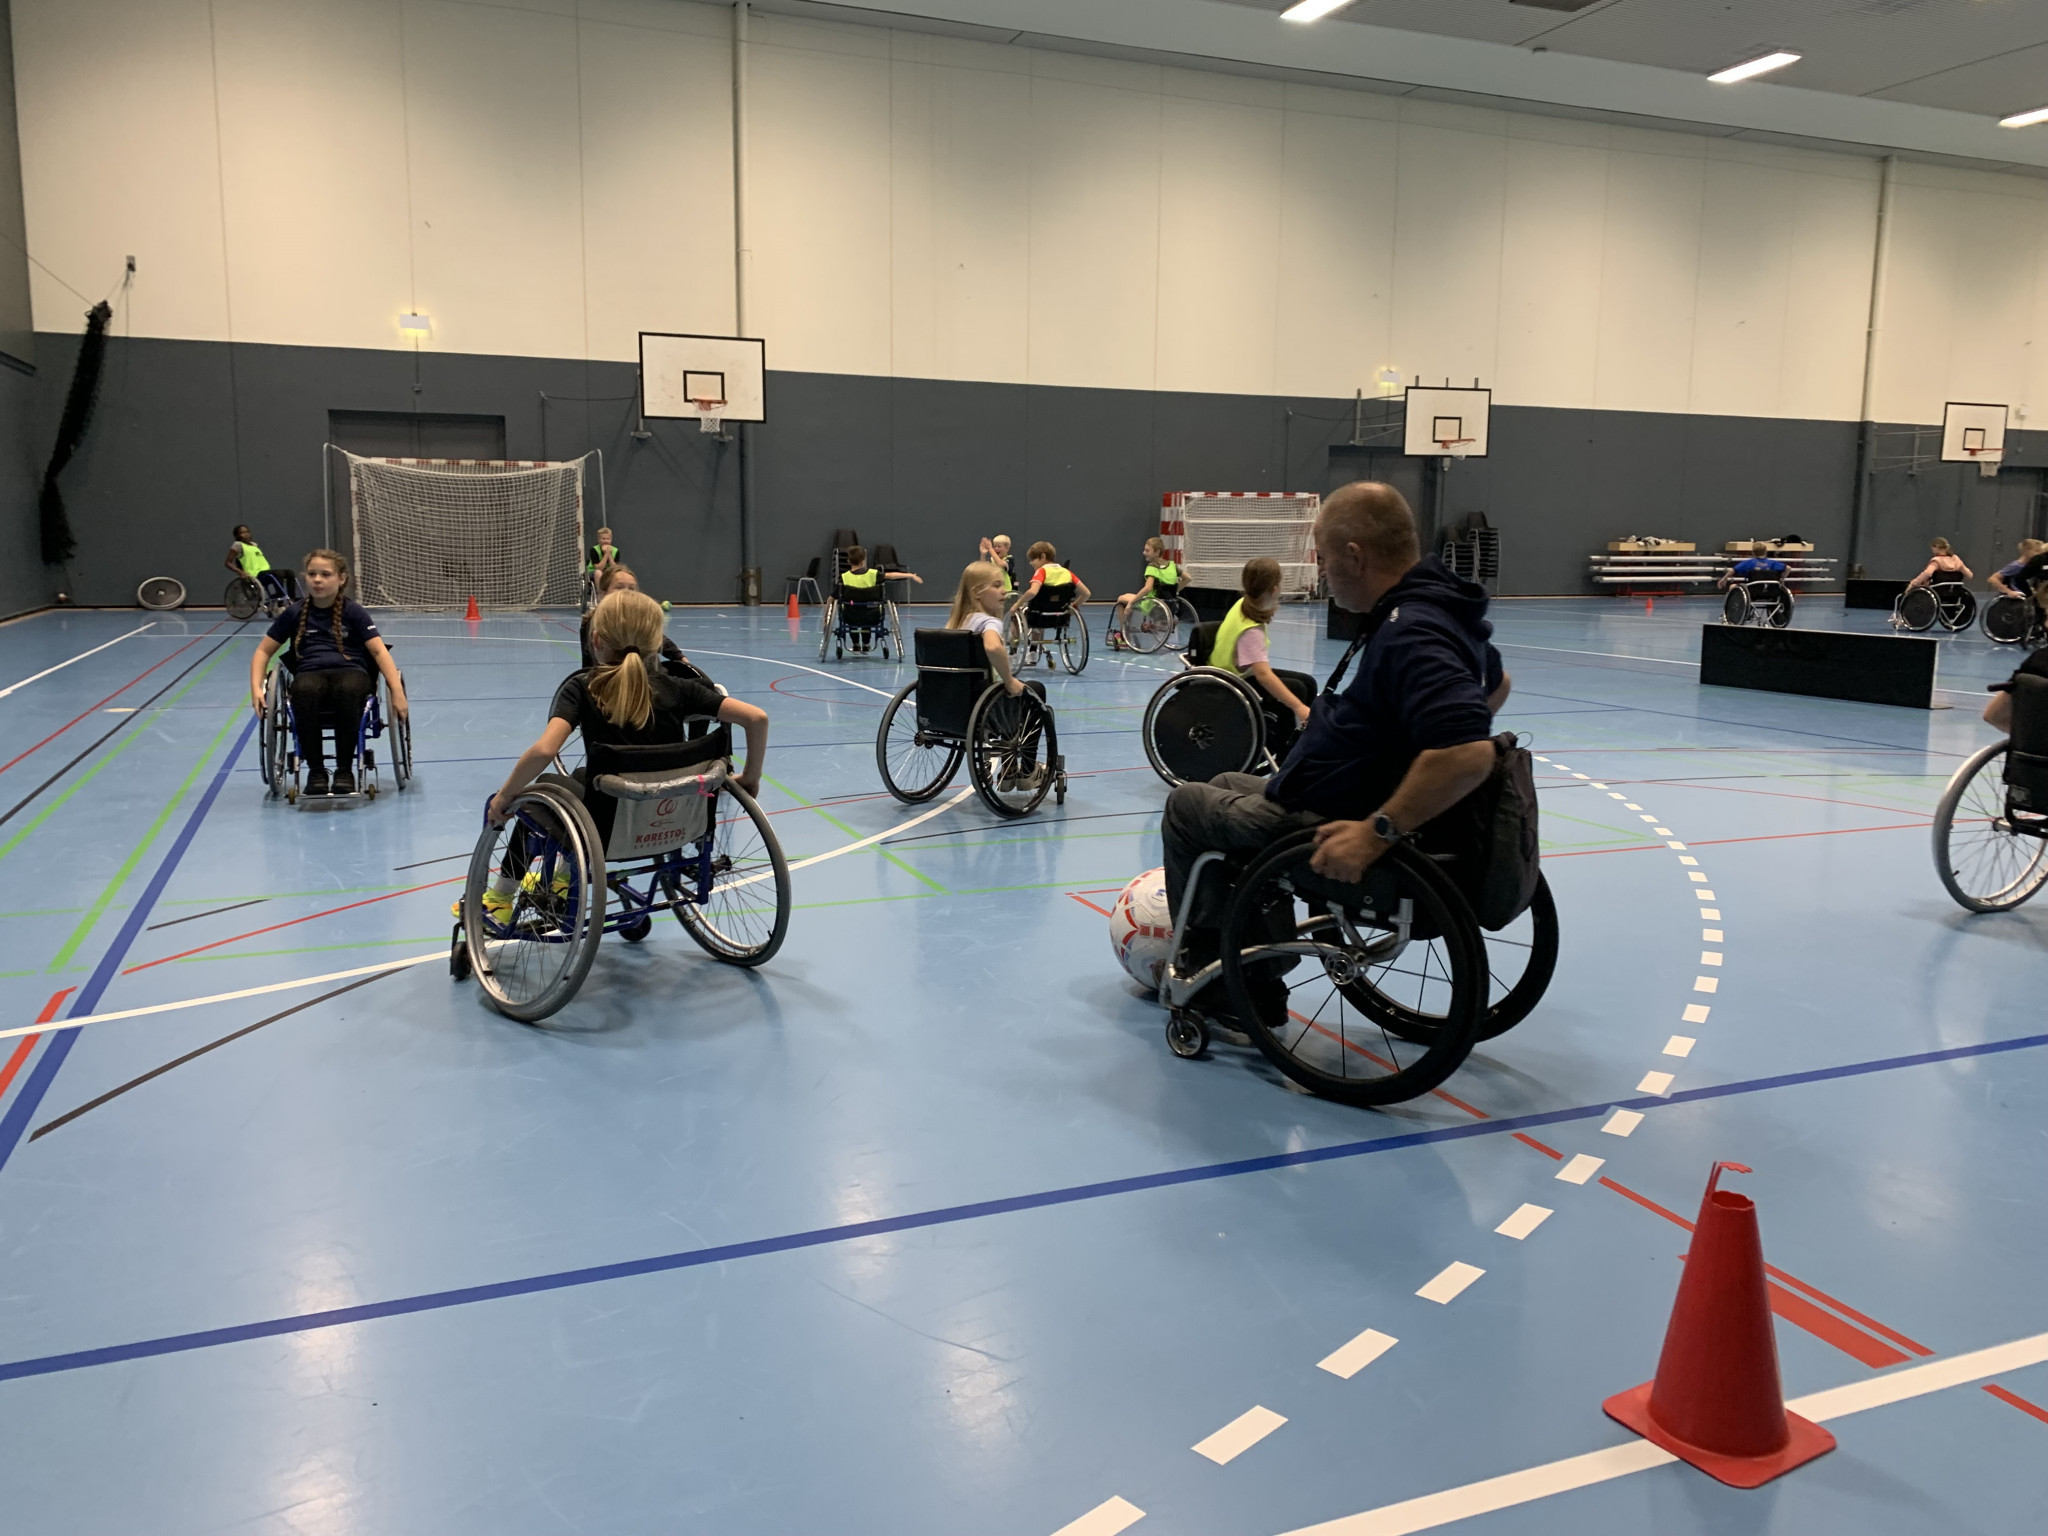 More than 100 children came to the DGI-Huset to participate in Para sport activities ©Vejle Municipality